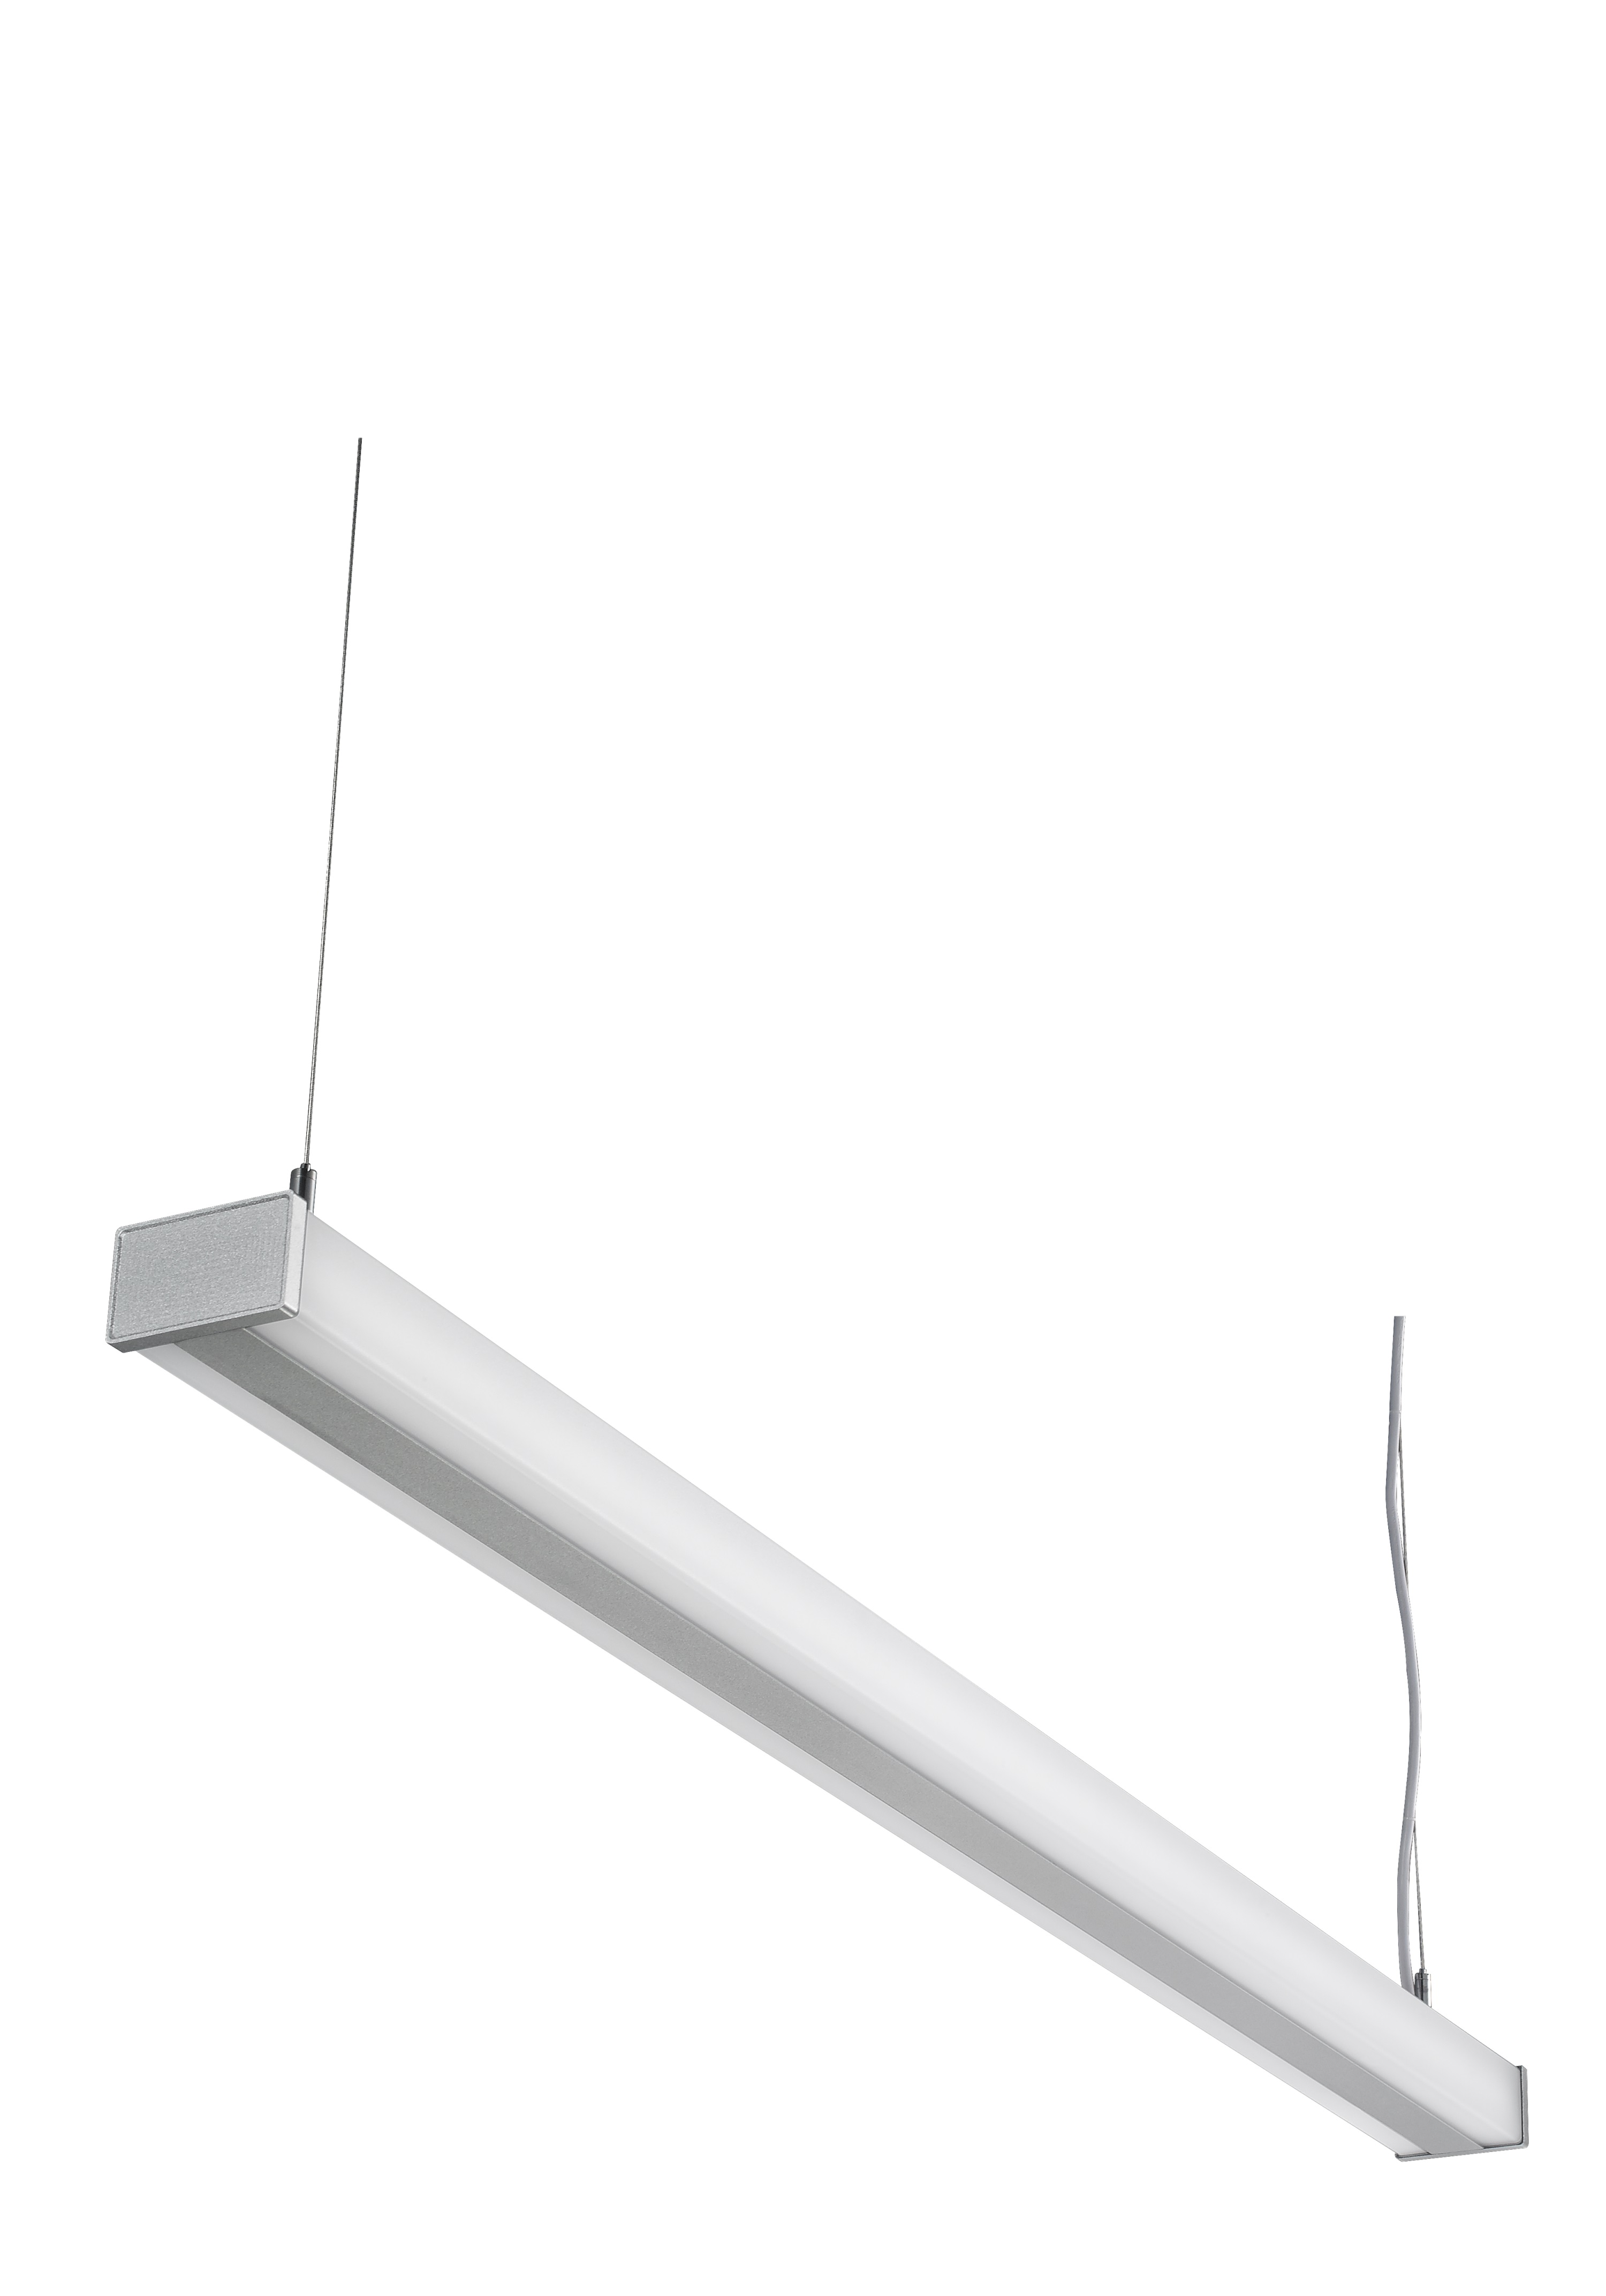 LED suspension linear lamp aluminium lighting fixture up and down light indoor chandelier lamp for office and commercial use LED-040B